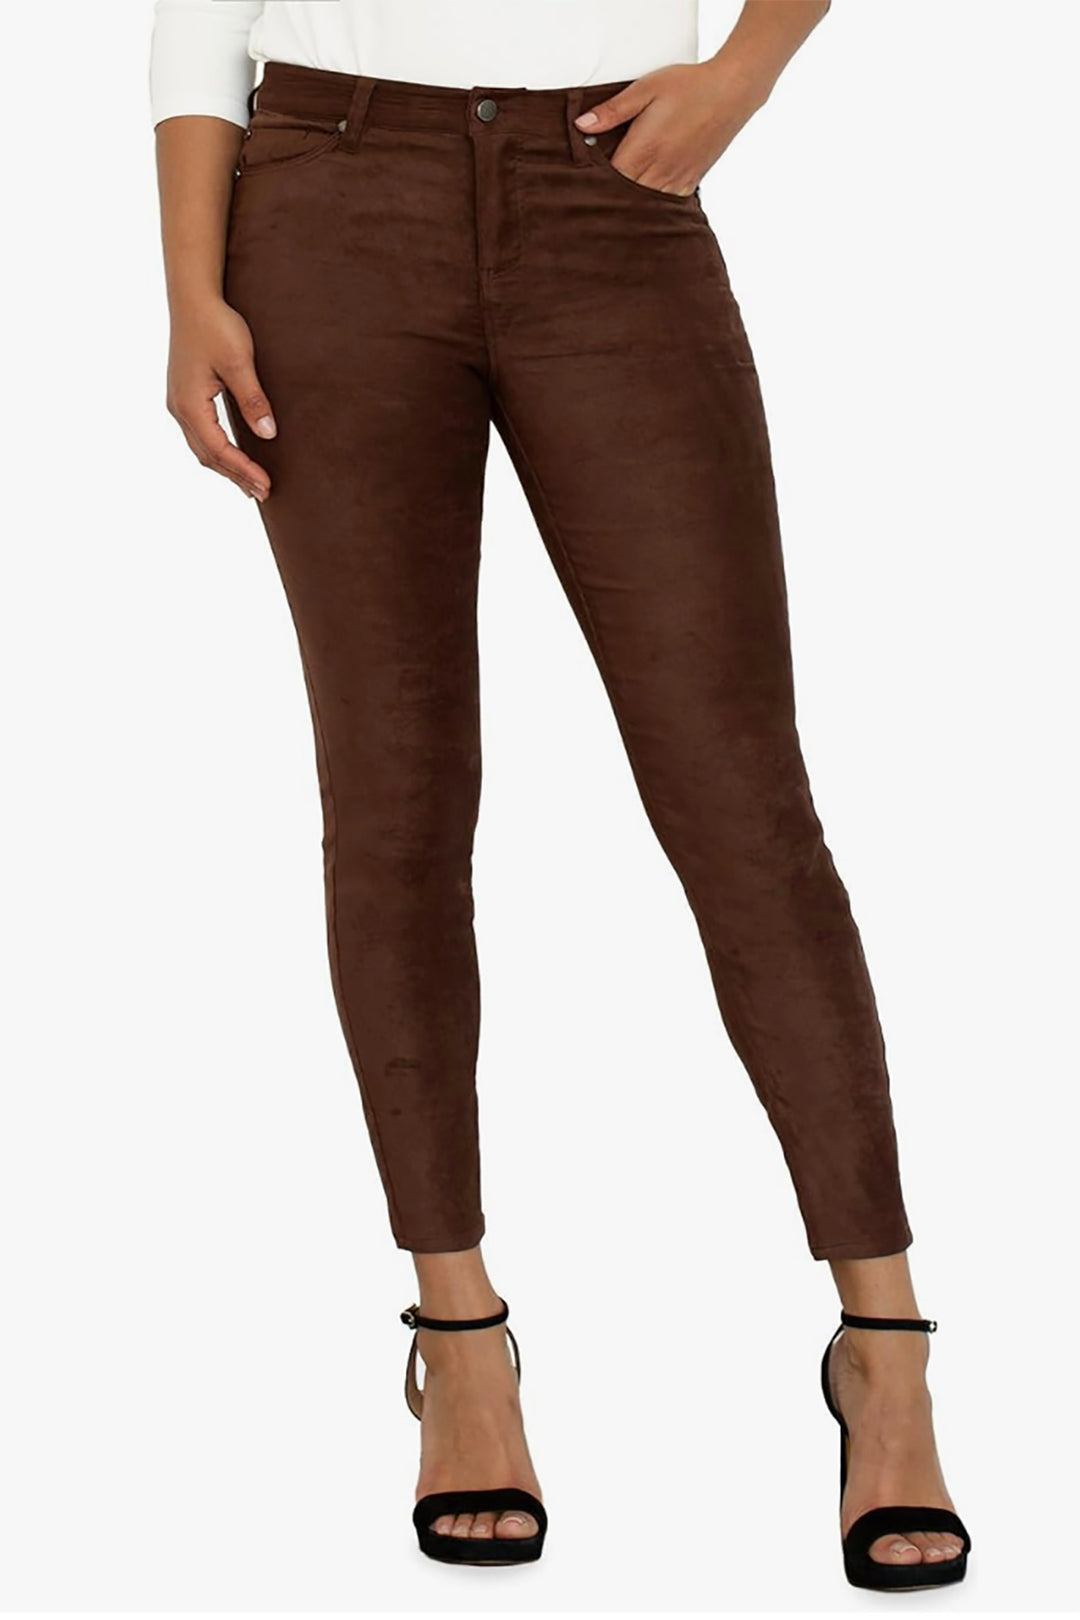 Woman wearing brown sueded skinny, ankle length jeans. Zip fly with button closure.Sold & shipped by Pizazz Boutique, Nelson Bay, NSW.